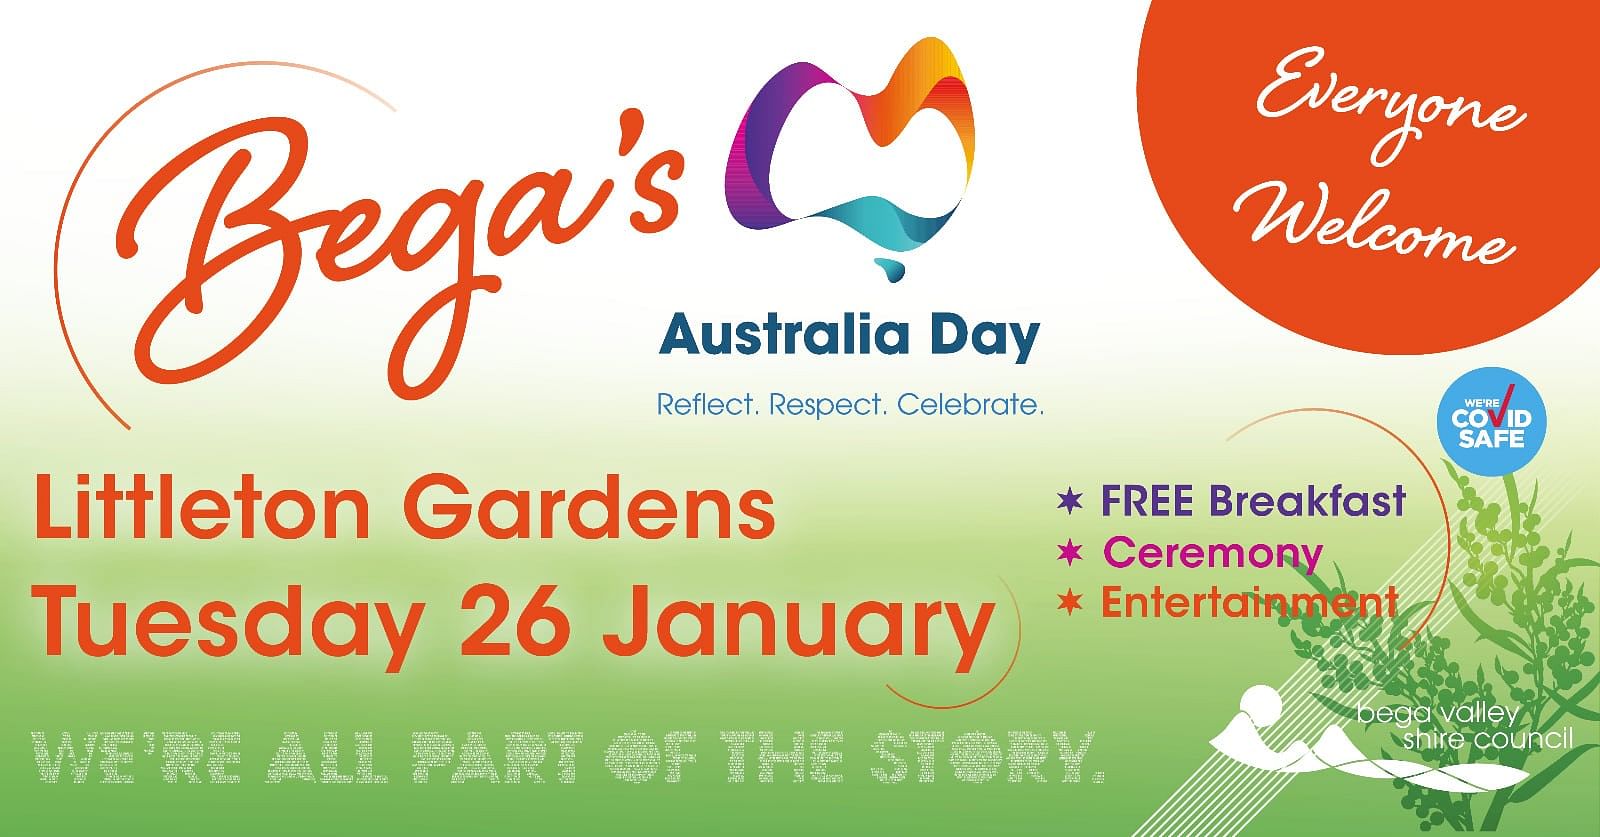 Australia poster, advertising Free breakfast at 7am, ceremony at 8.30am with local entertainment.